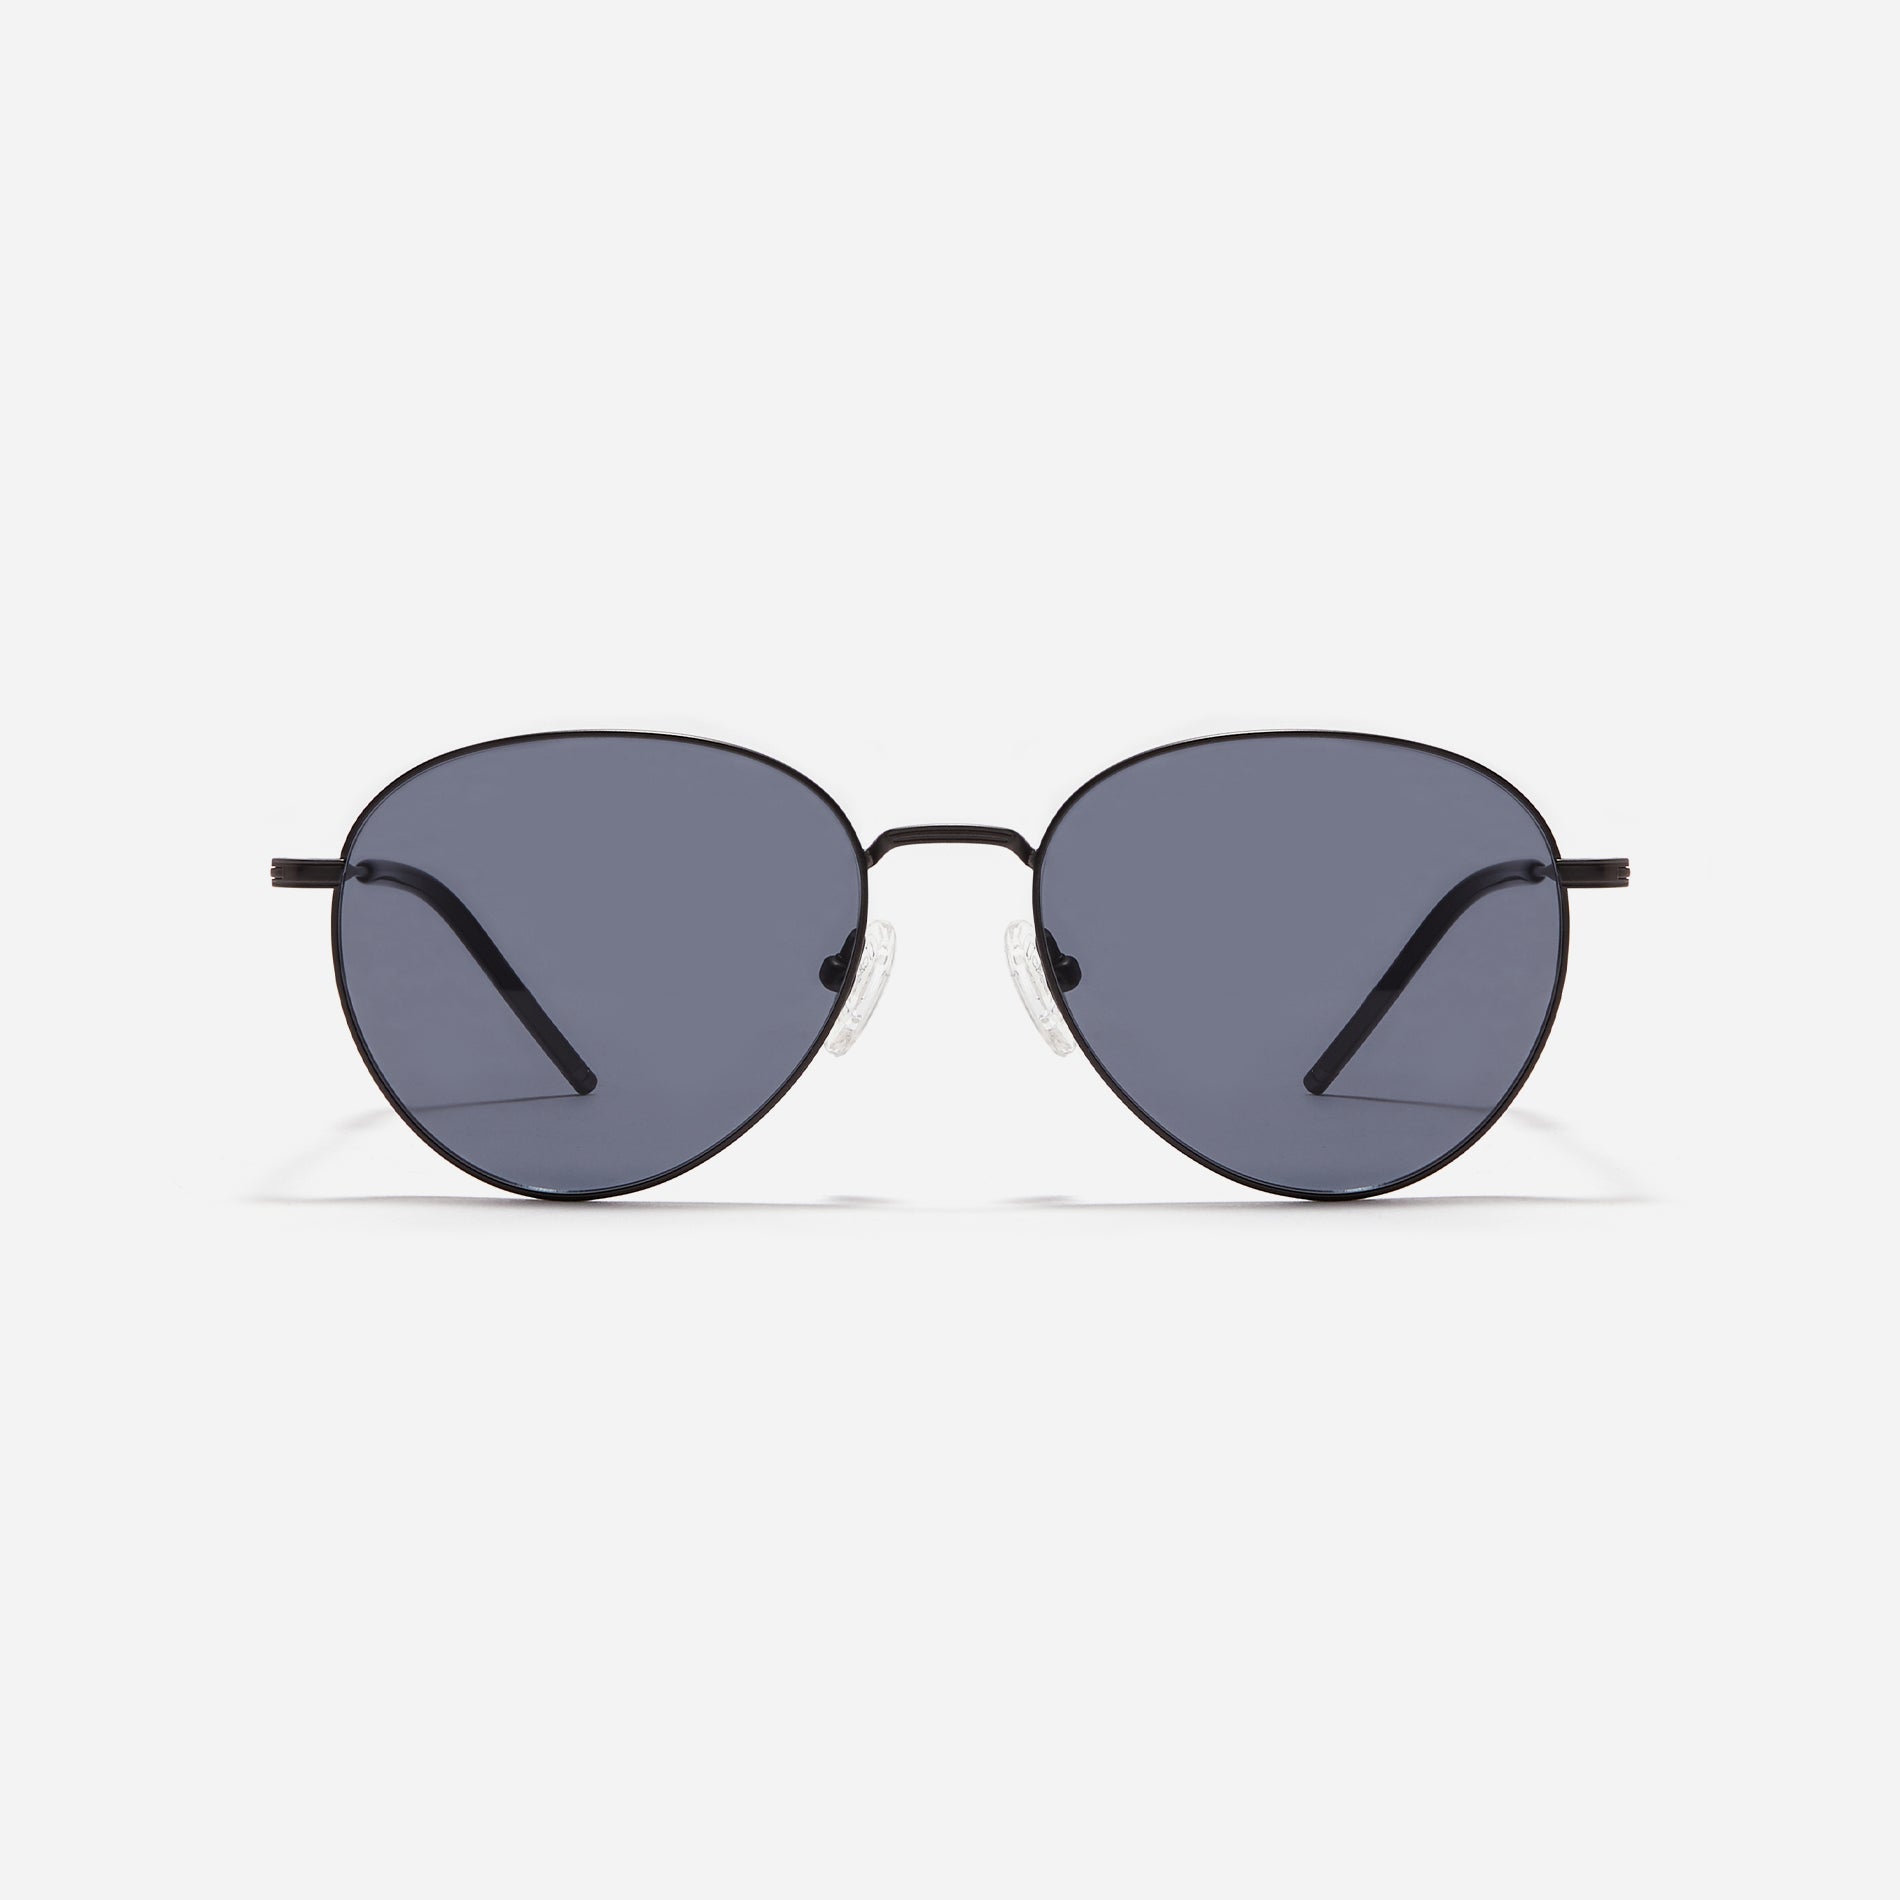 Retro aesthetic Boeing-style sunglasses crafted entirely from titanium.